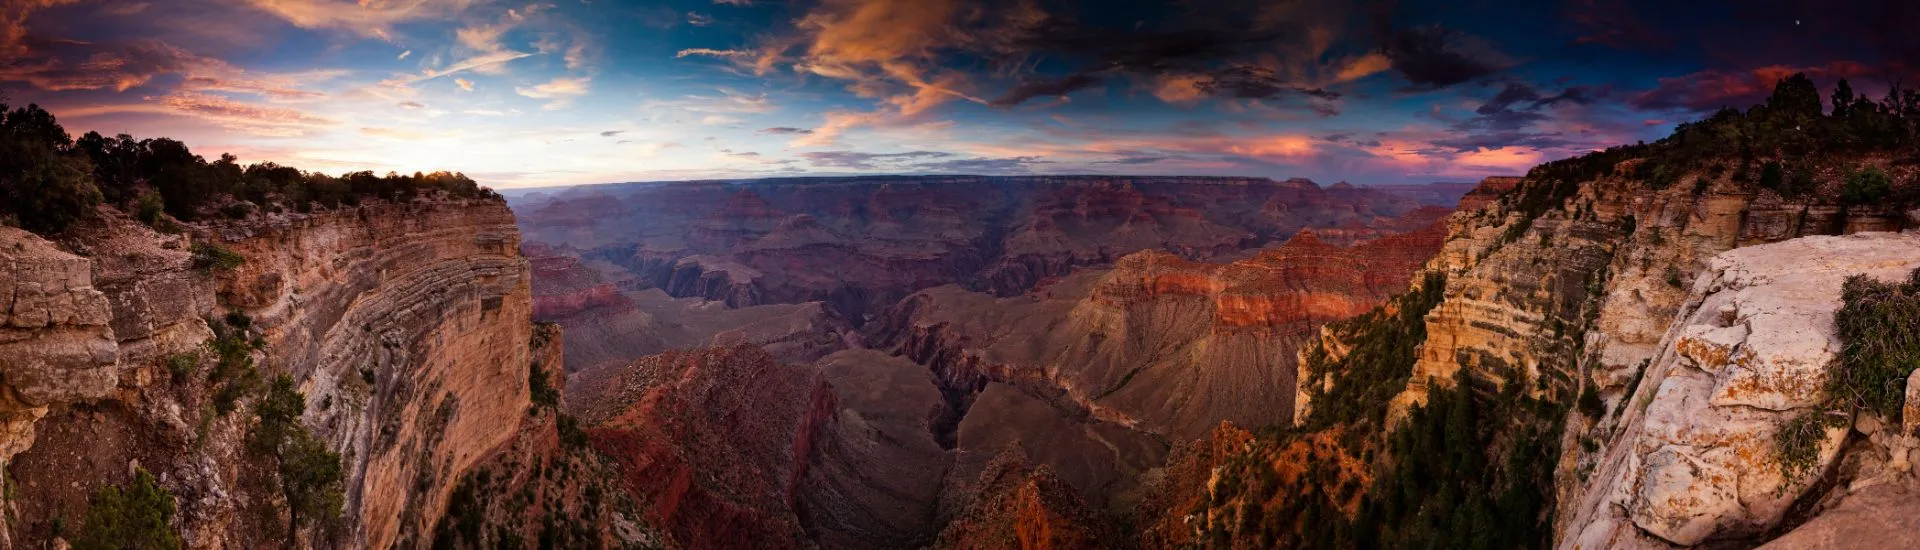 Sunset from the top of the Grand Canyon, Arizona